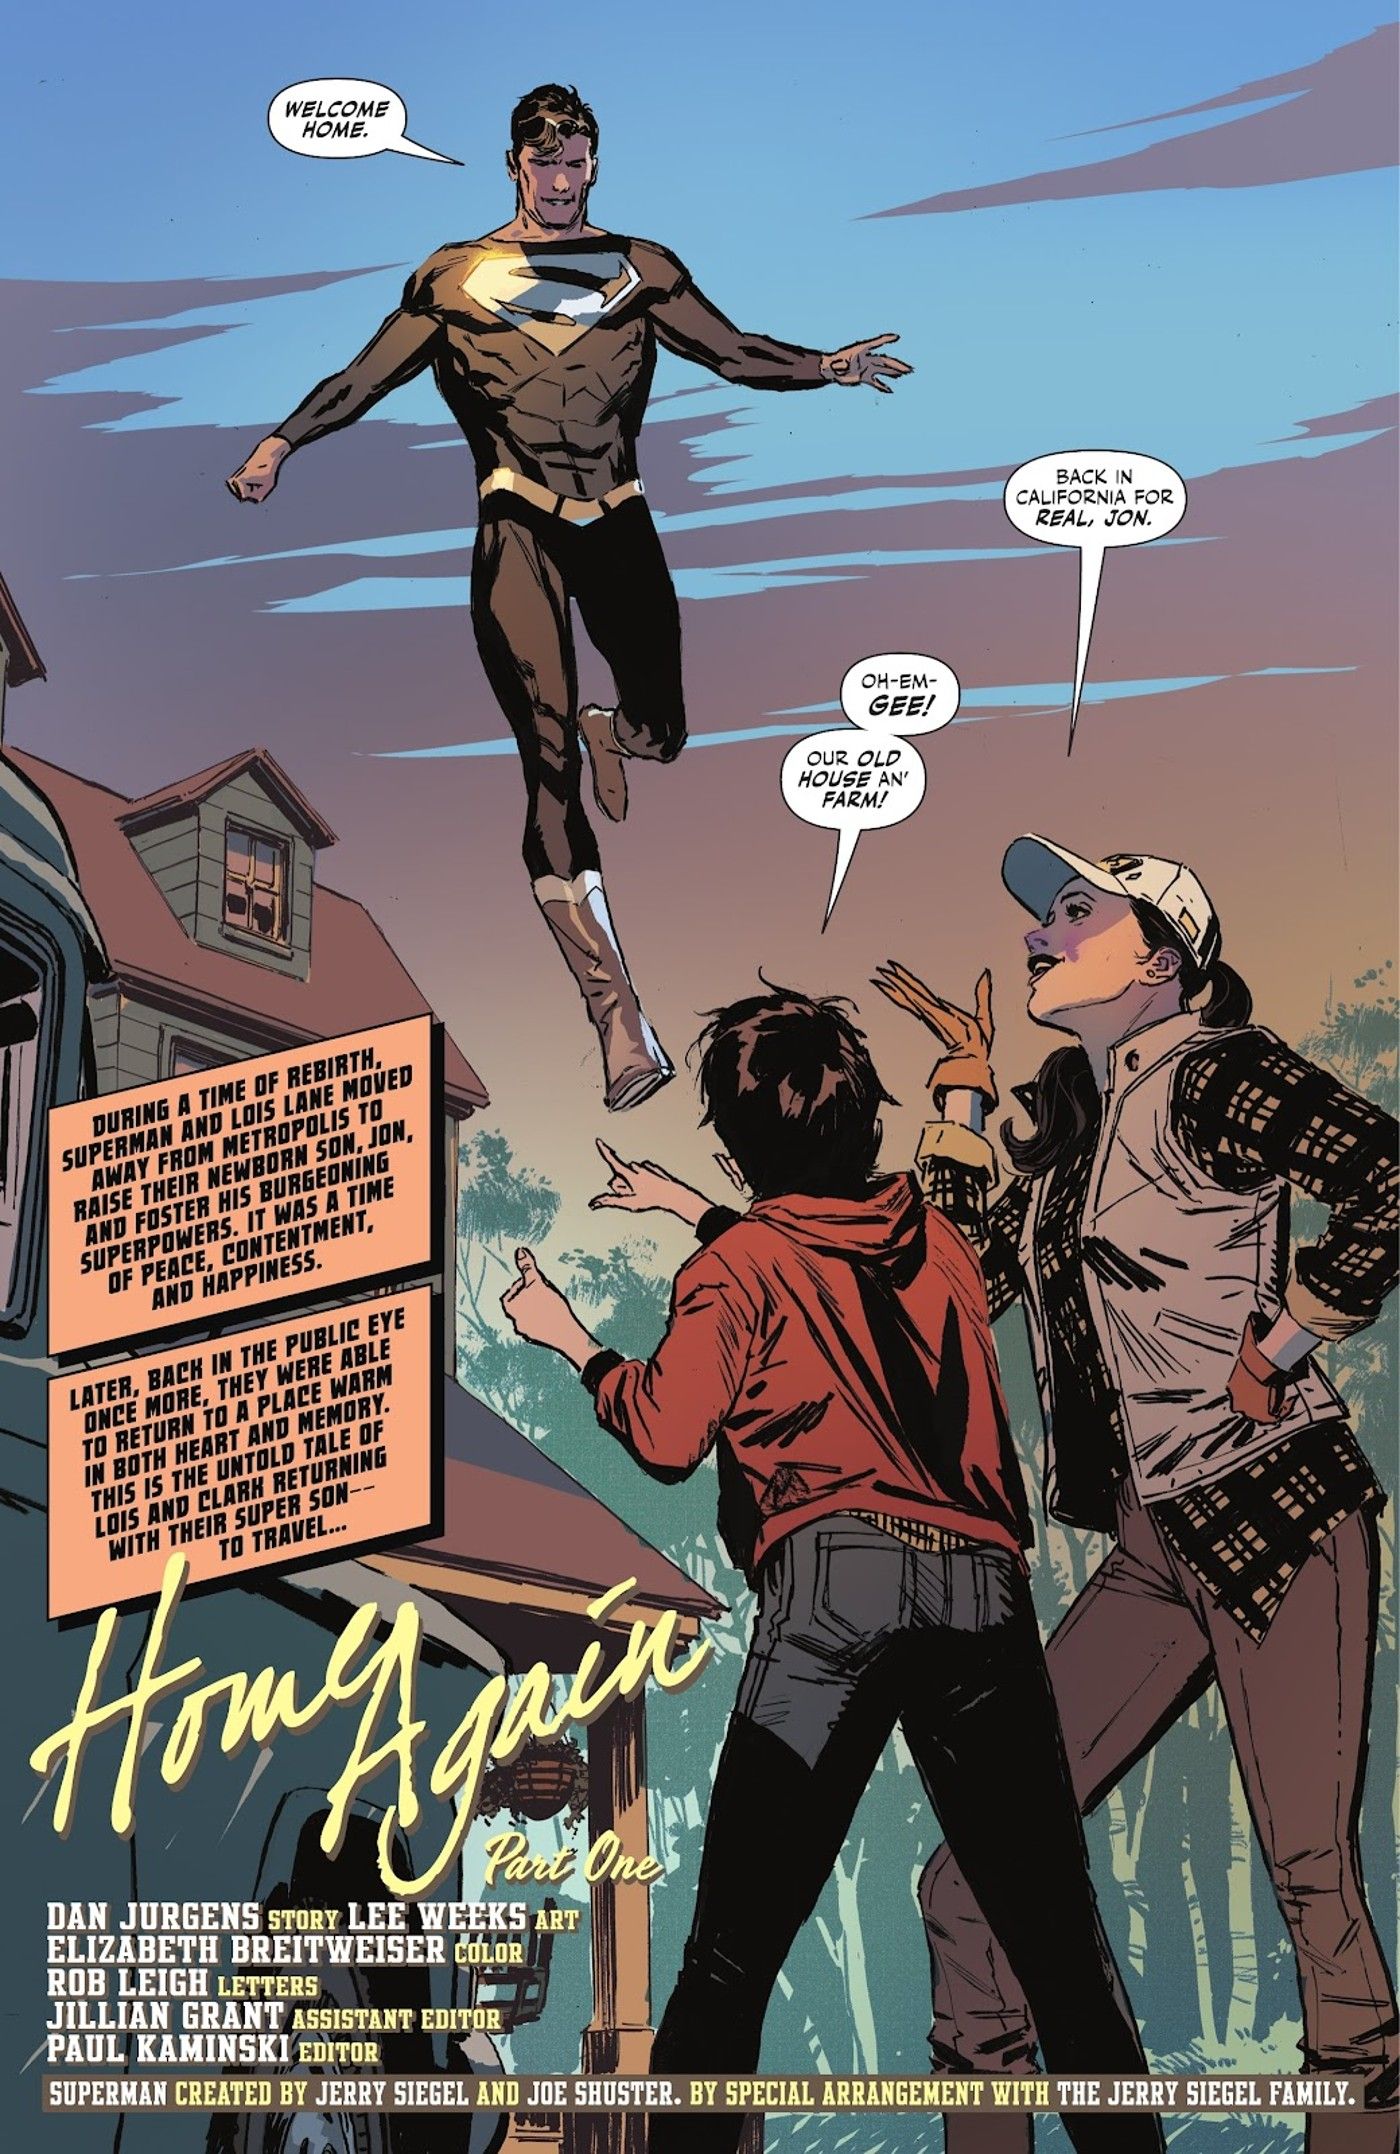 Superman in a Black Costume Descending to Meet Lois Lane and Young Jon Kent